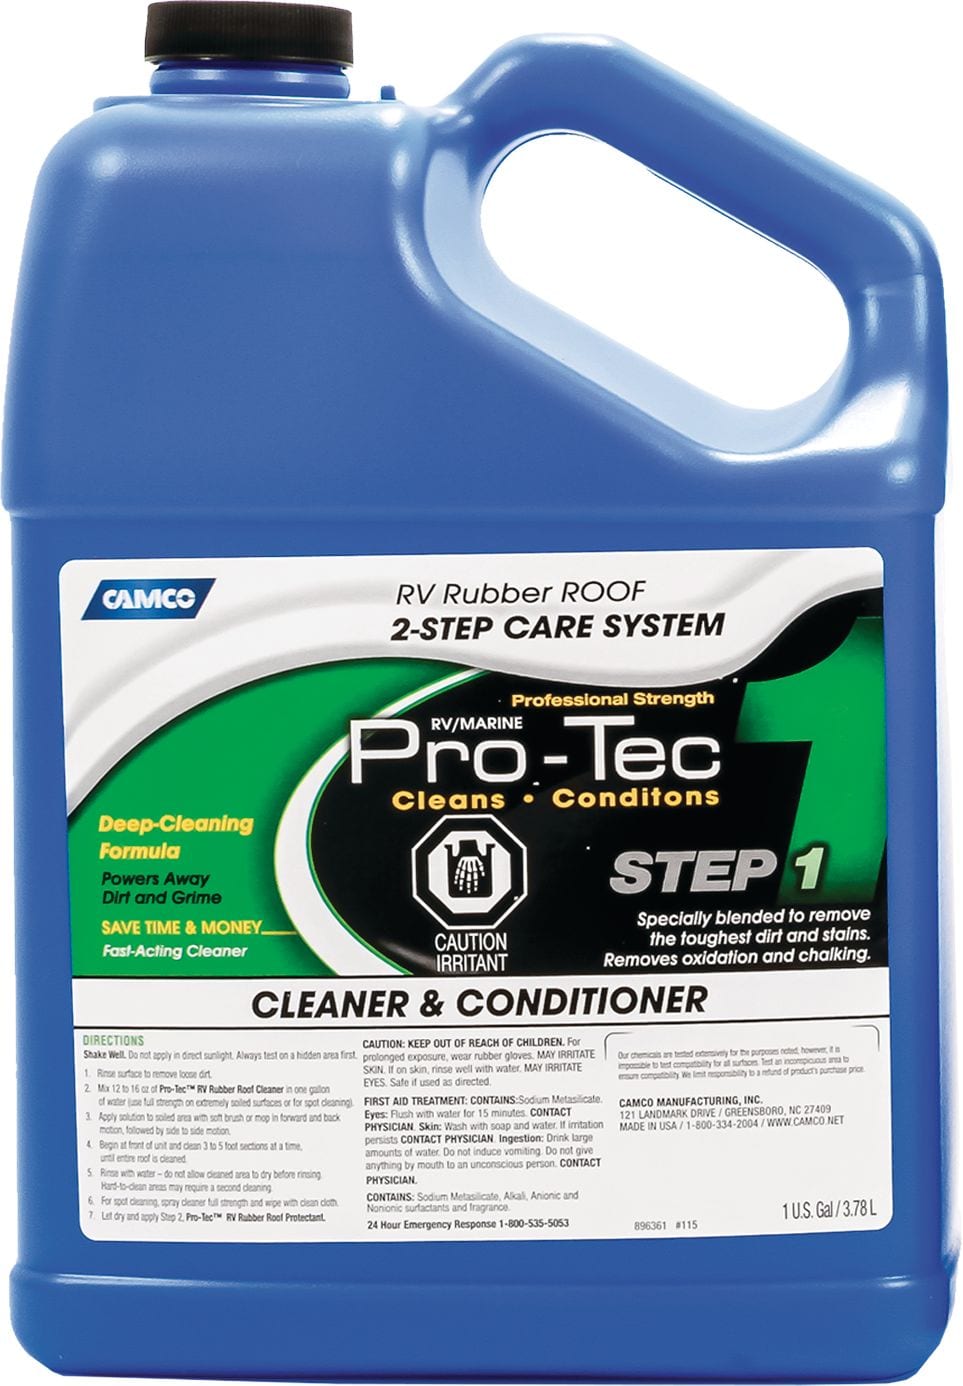 CAMCO Pro-Tech Cleaner & Protectent 2-Steps RV Rubber Roof Care System